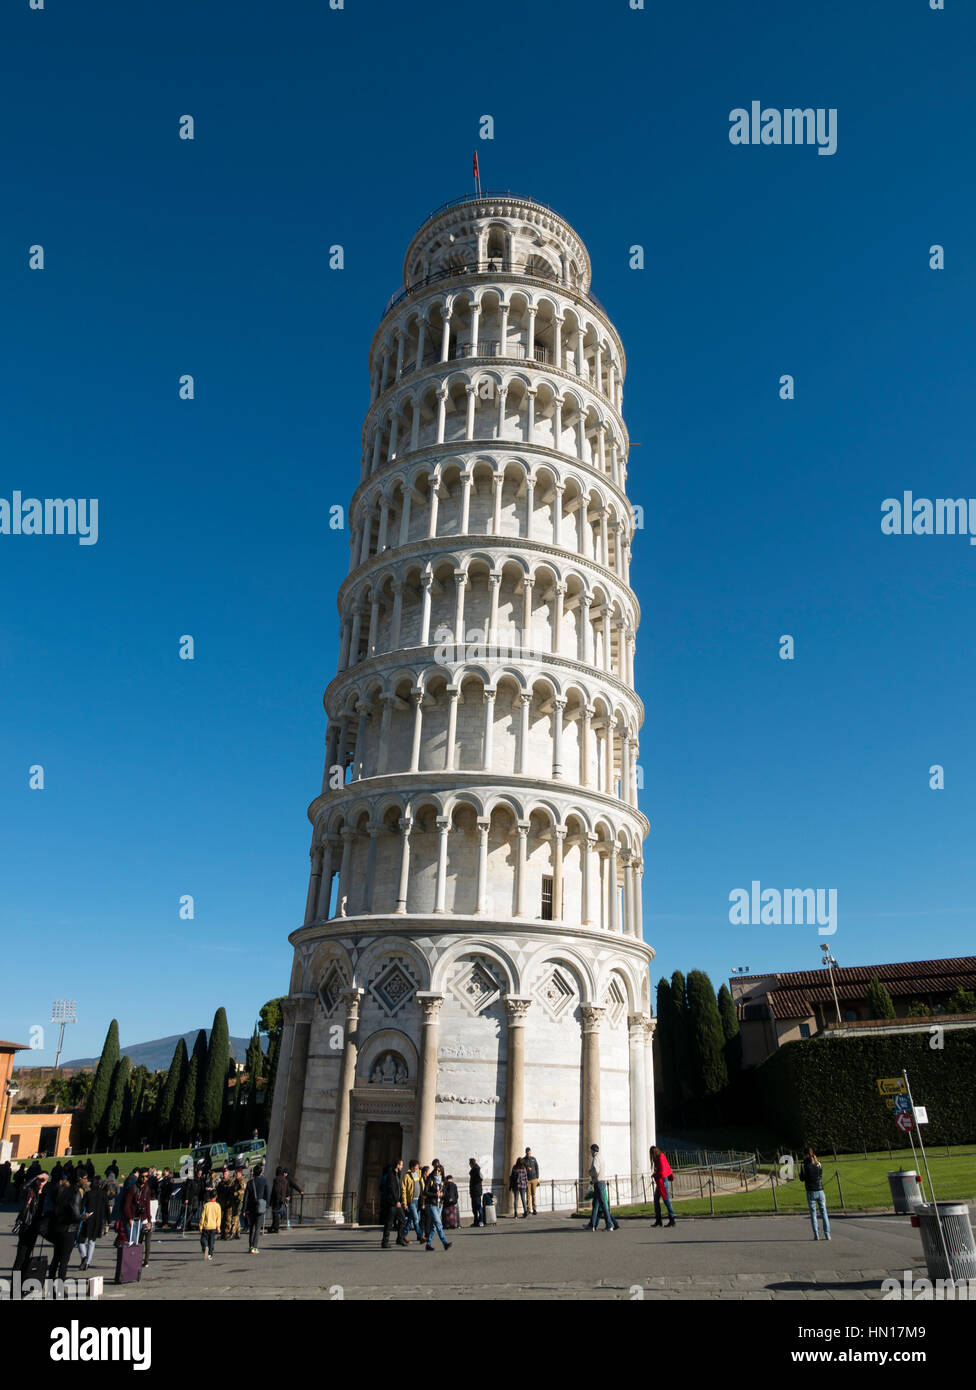 The Leaning Tower of Pisa (Torre pendente di Pisa), Pisa, Tuscany, Italy. Stock Photo